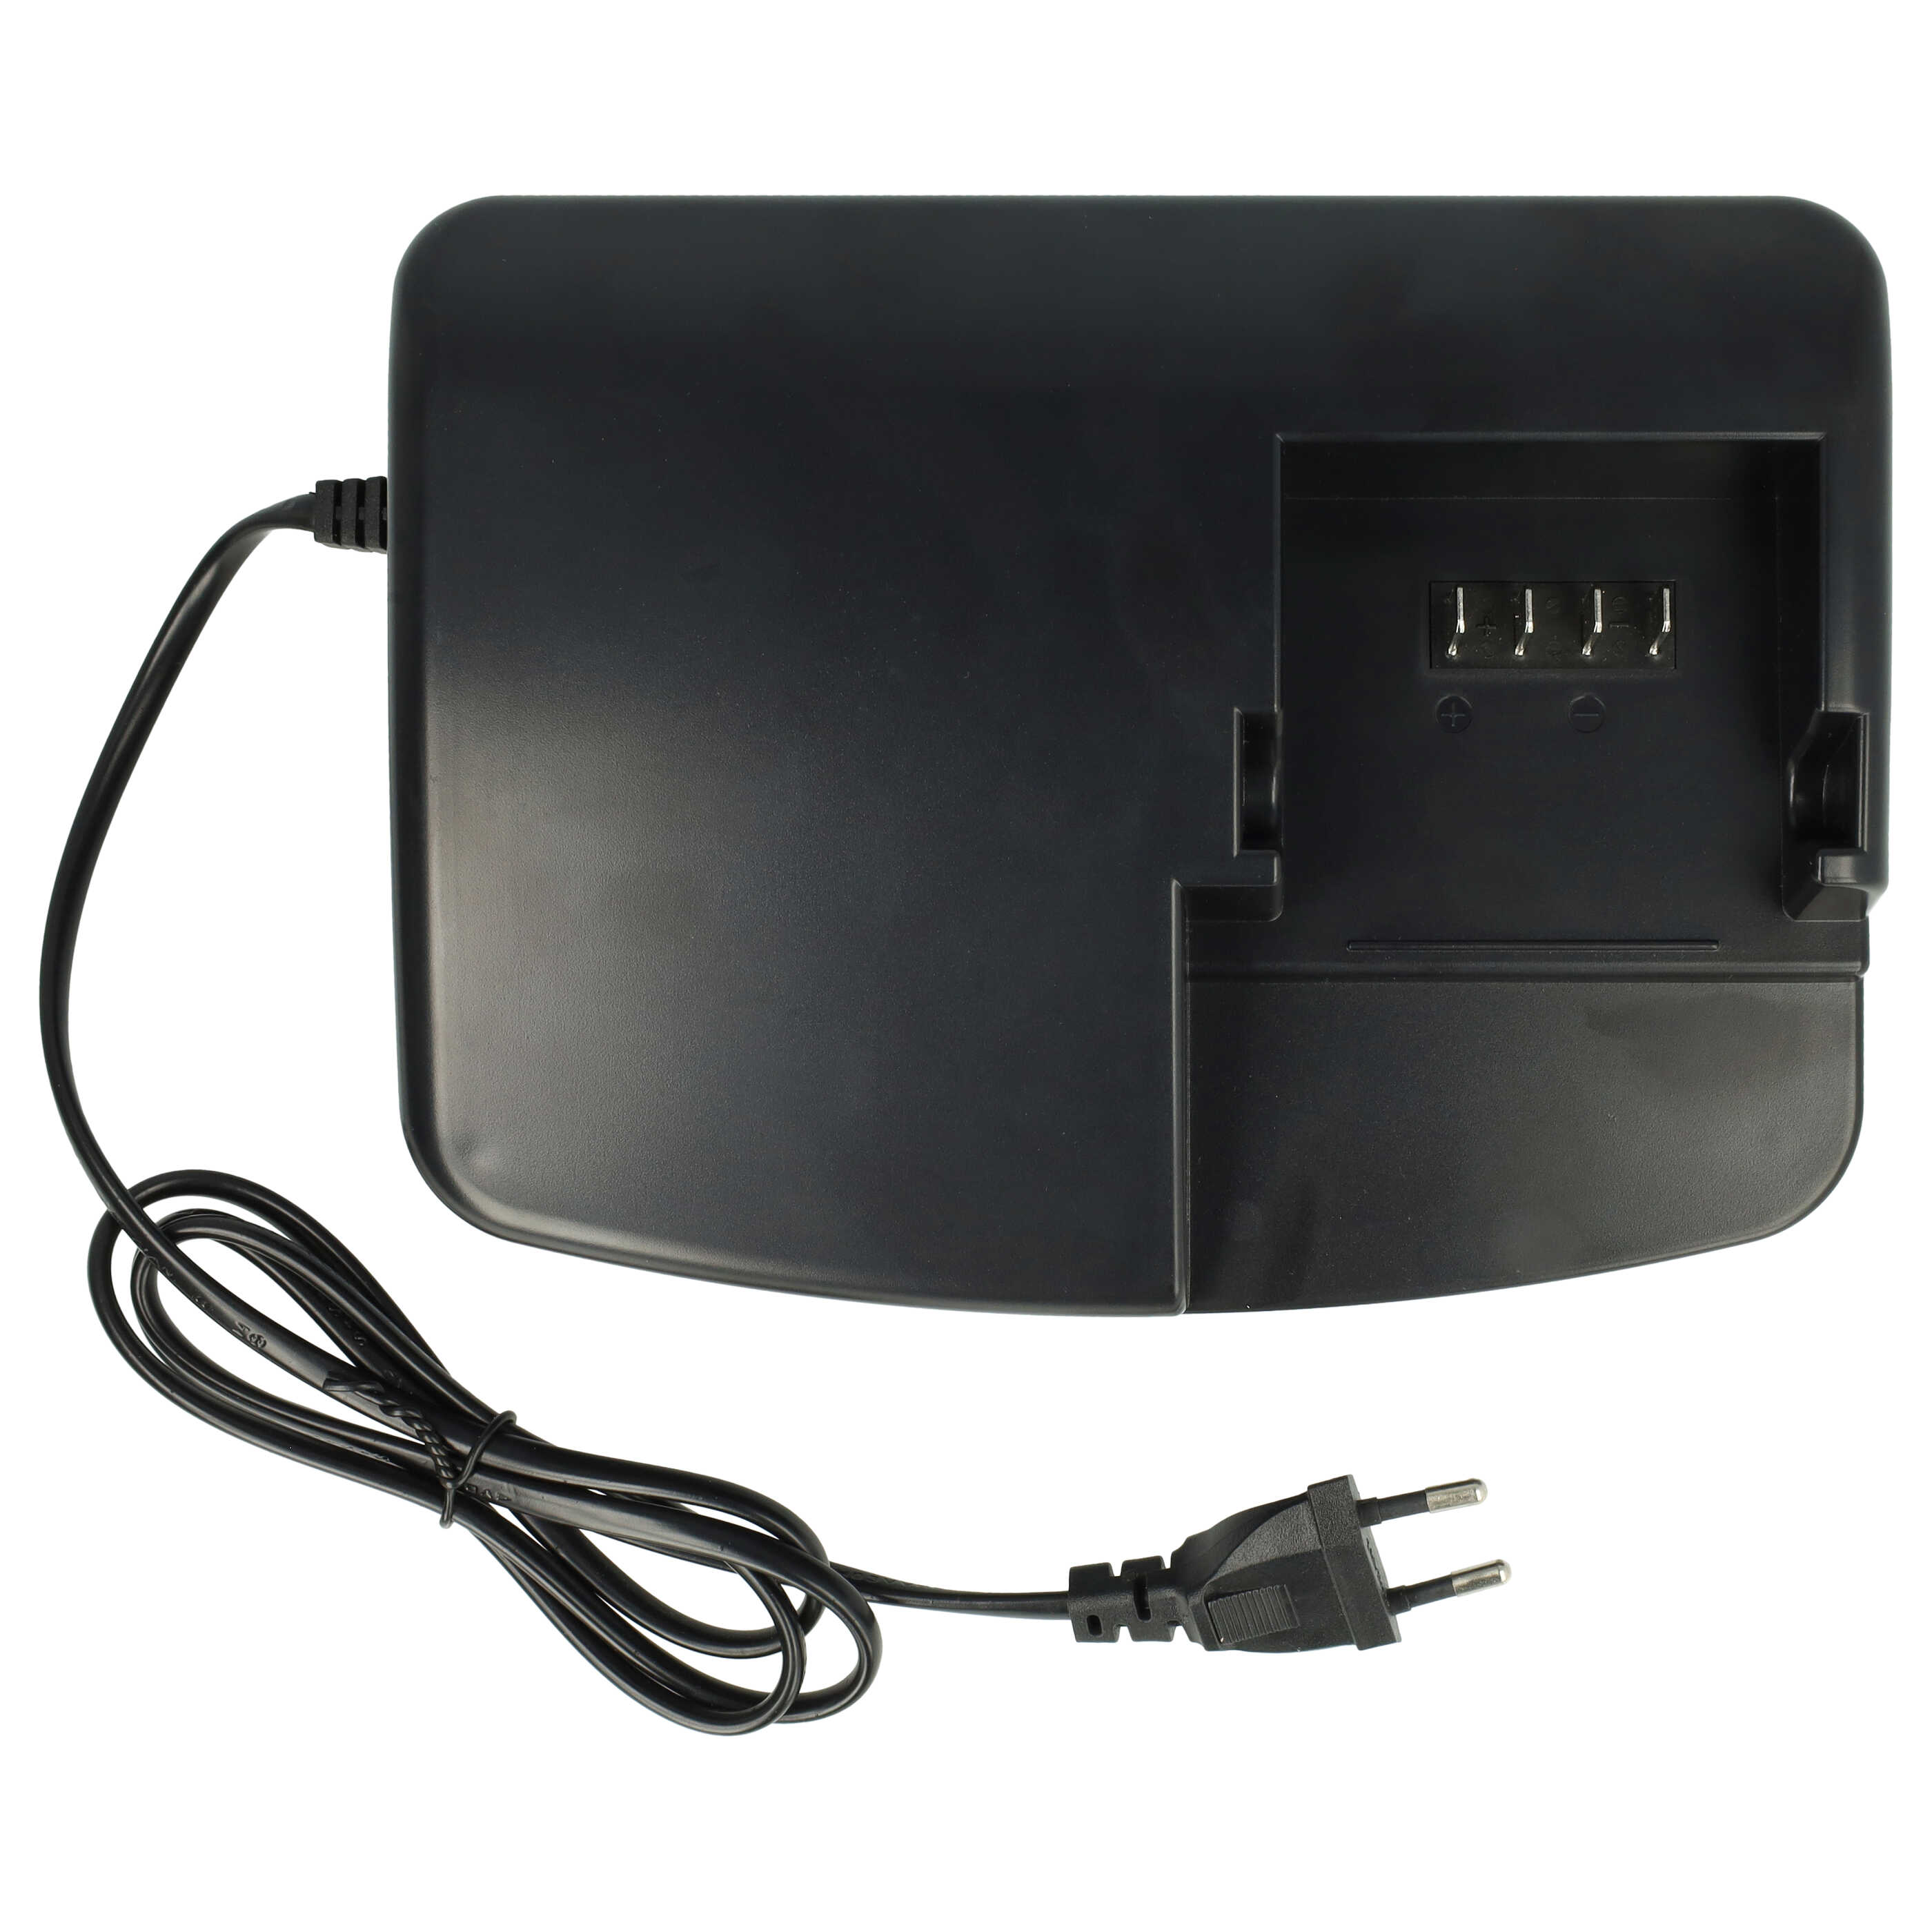 Charger suitable for Gazelle E-Bike Battery etc. - 4.0 A